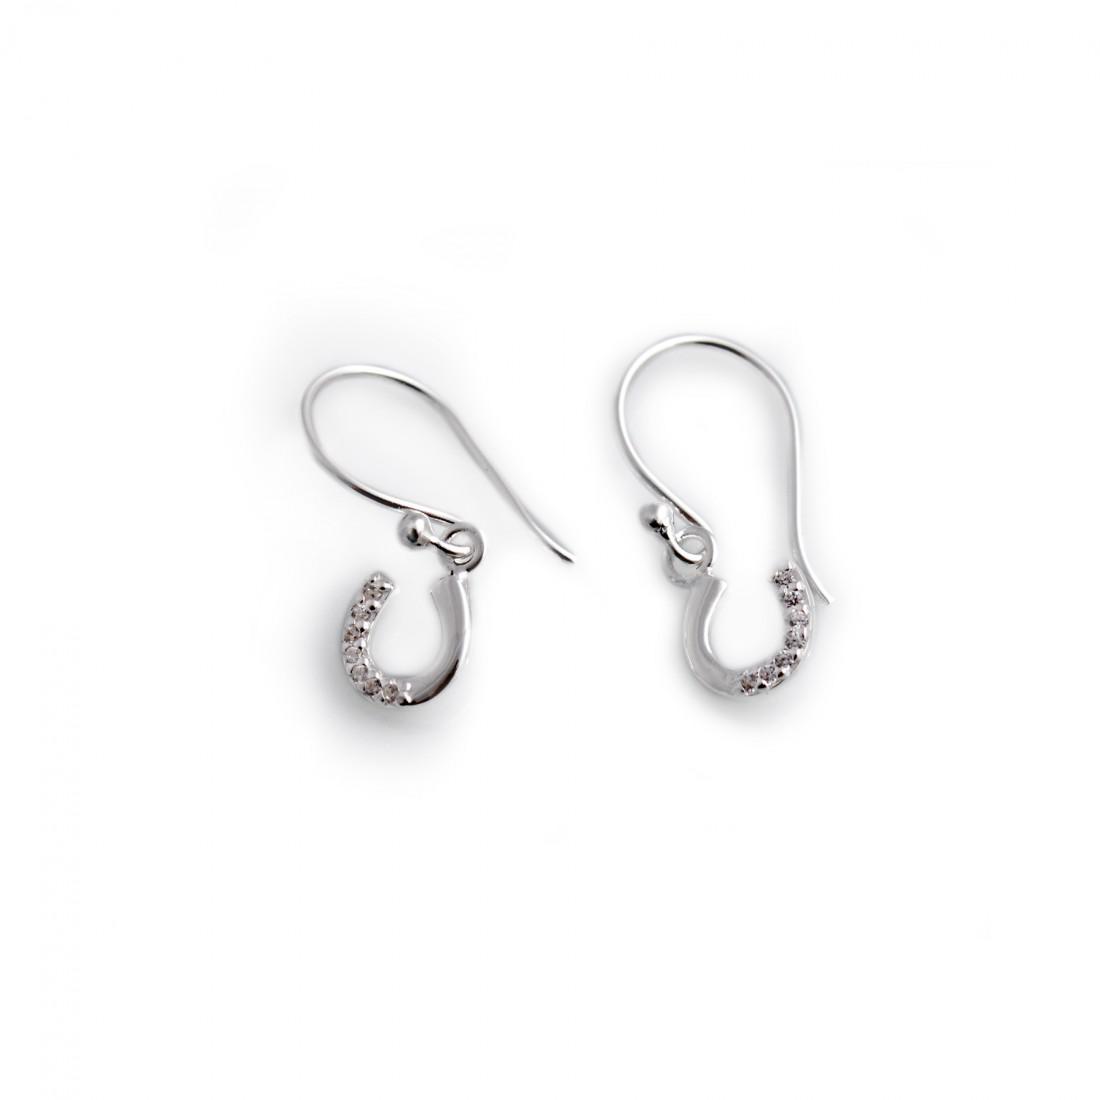 Exclusive Sterling Silver & CZ Dangly Horseshoe Earrings